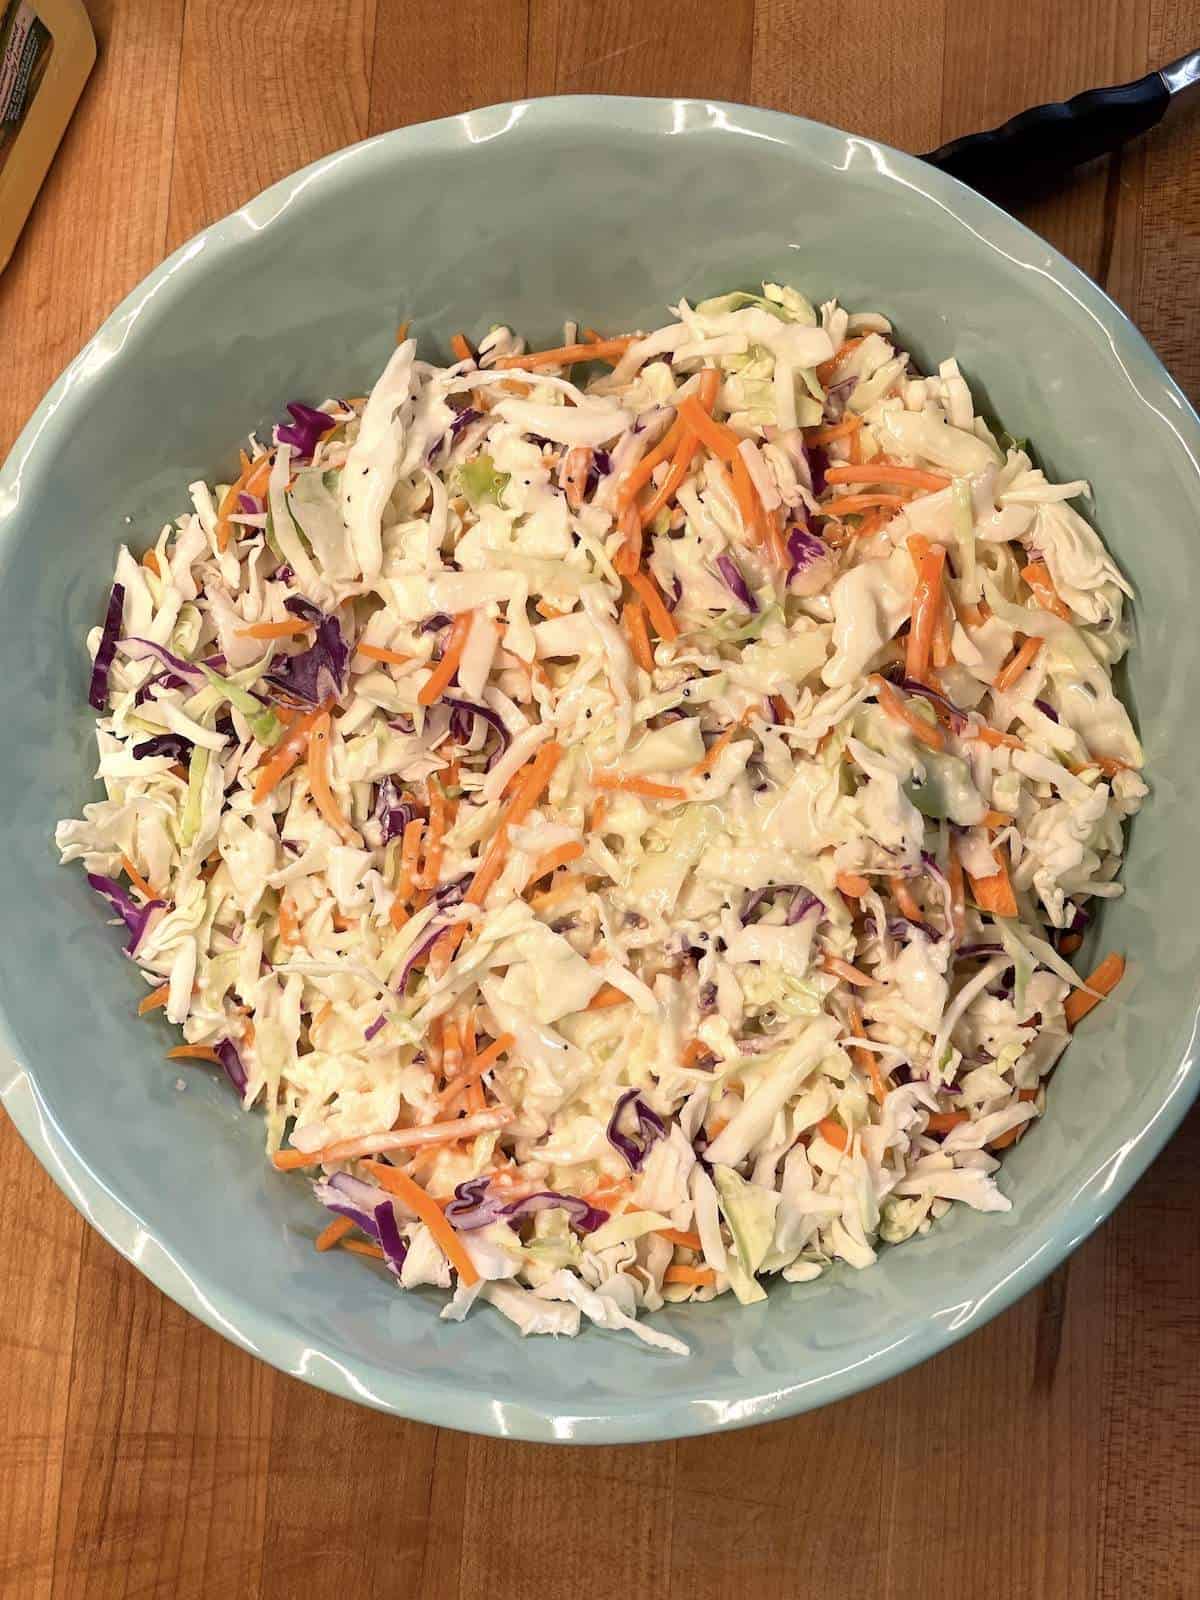 A bowl of shredded cabbage drizzled in coleslaw dressing.